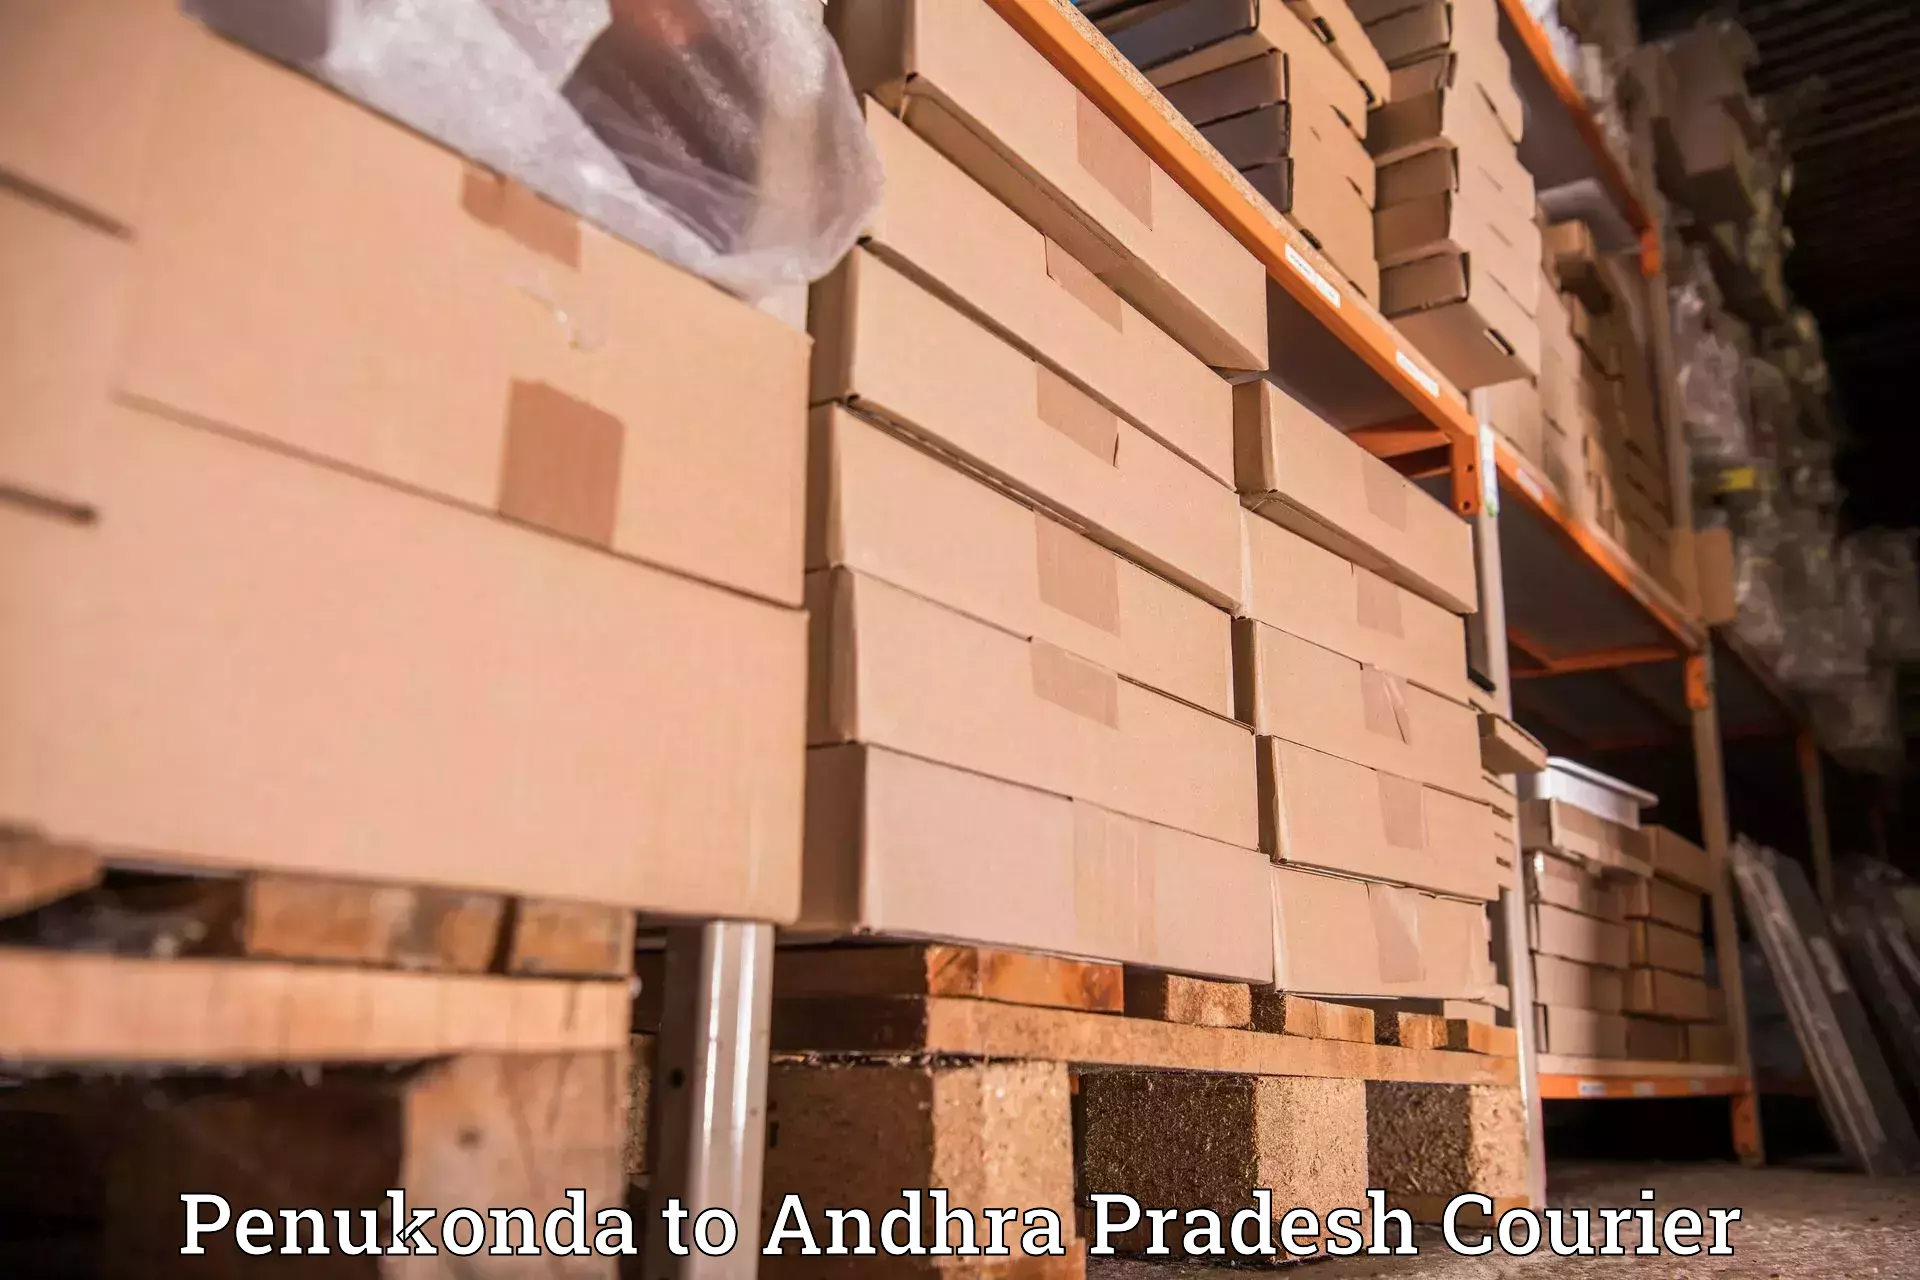 Next-day delivery options in Penukonda to Kudair